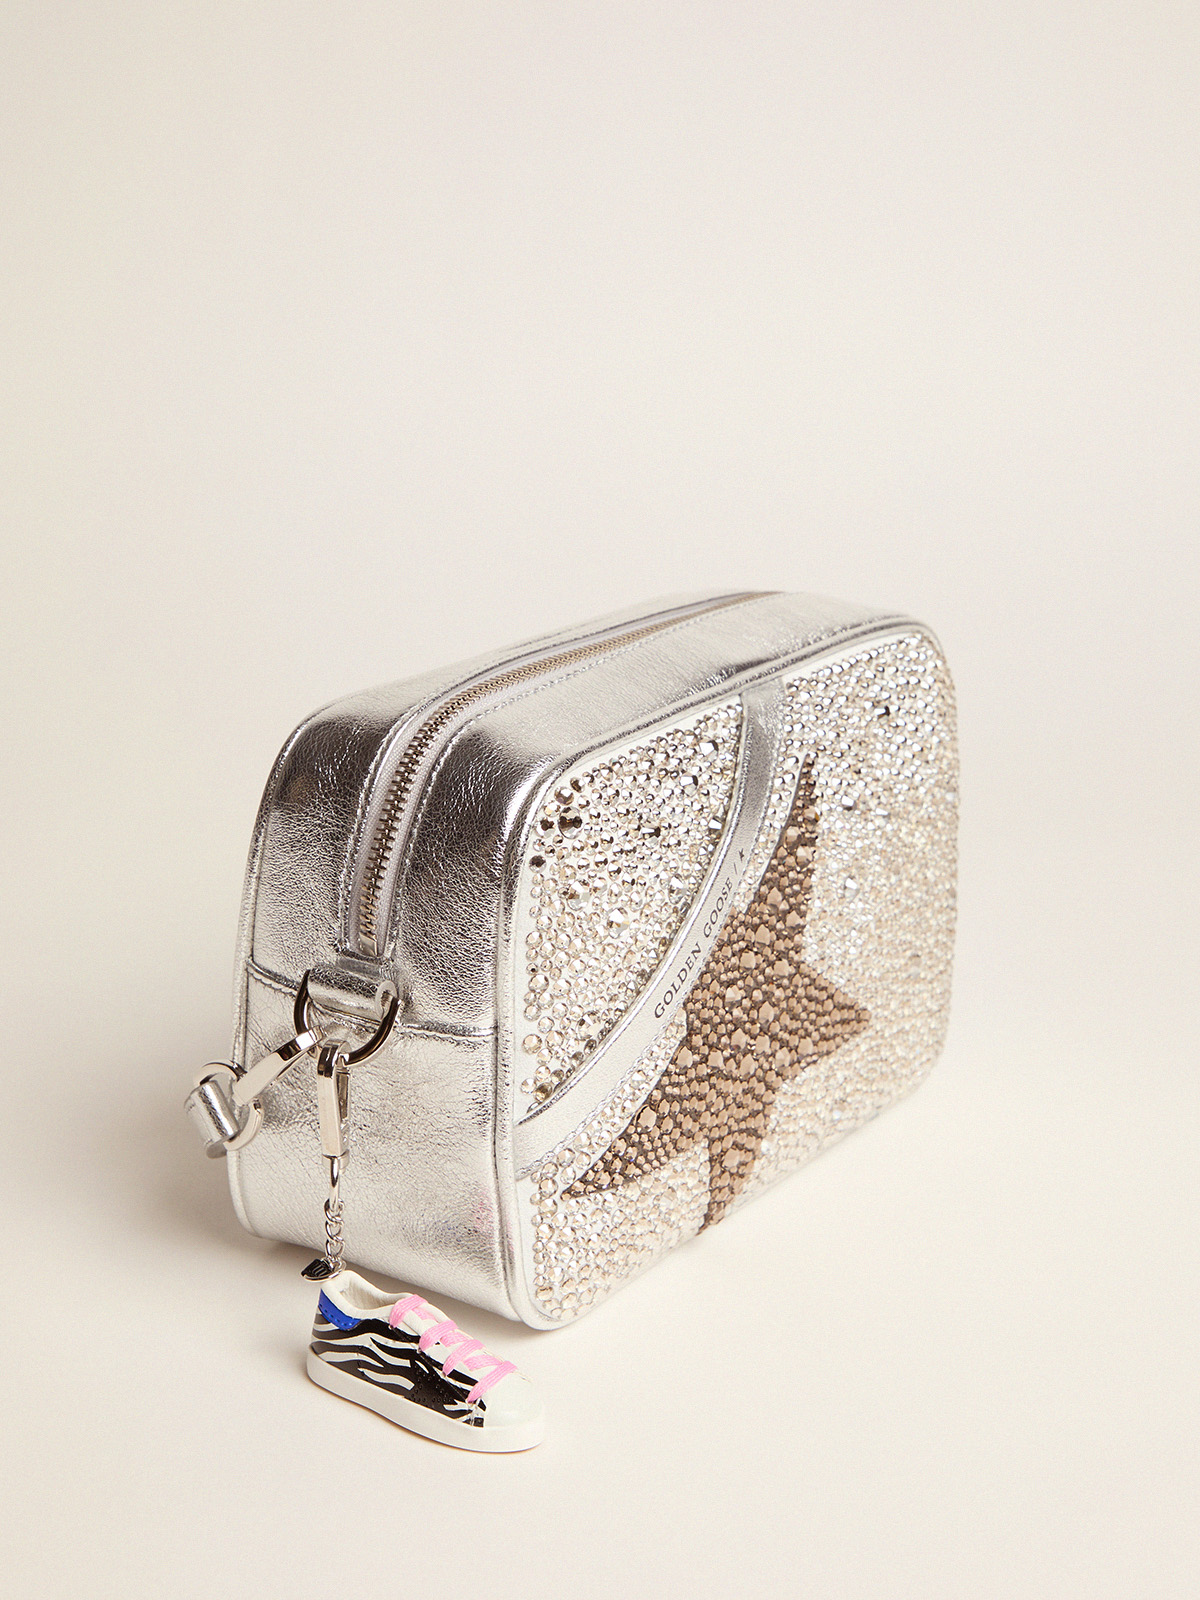 Star Bag made of laminated leather with Swarovski crystals | Golden Goose